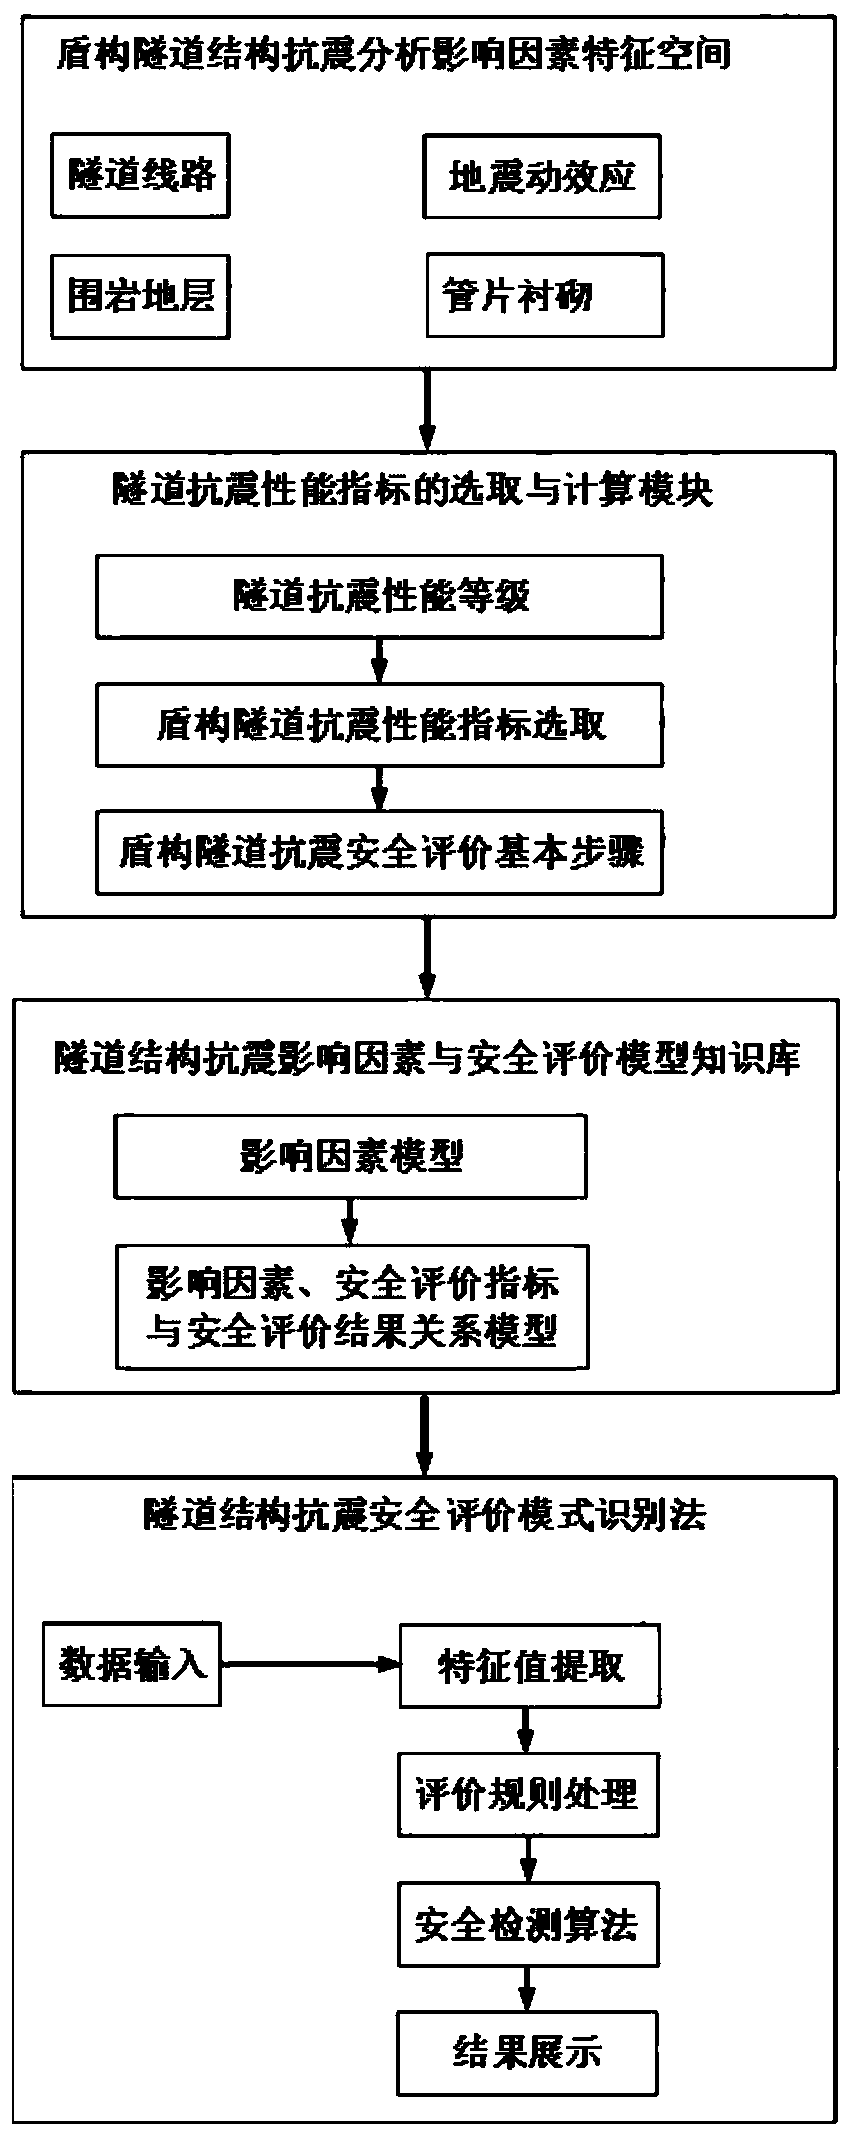 Shield tunnel structure anti-seismic safety evaluation method based on pattern recognition